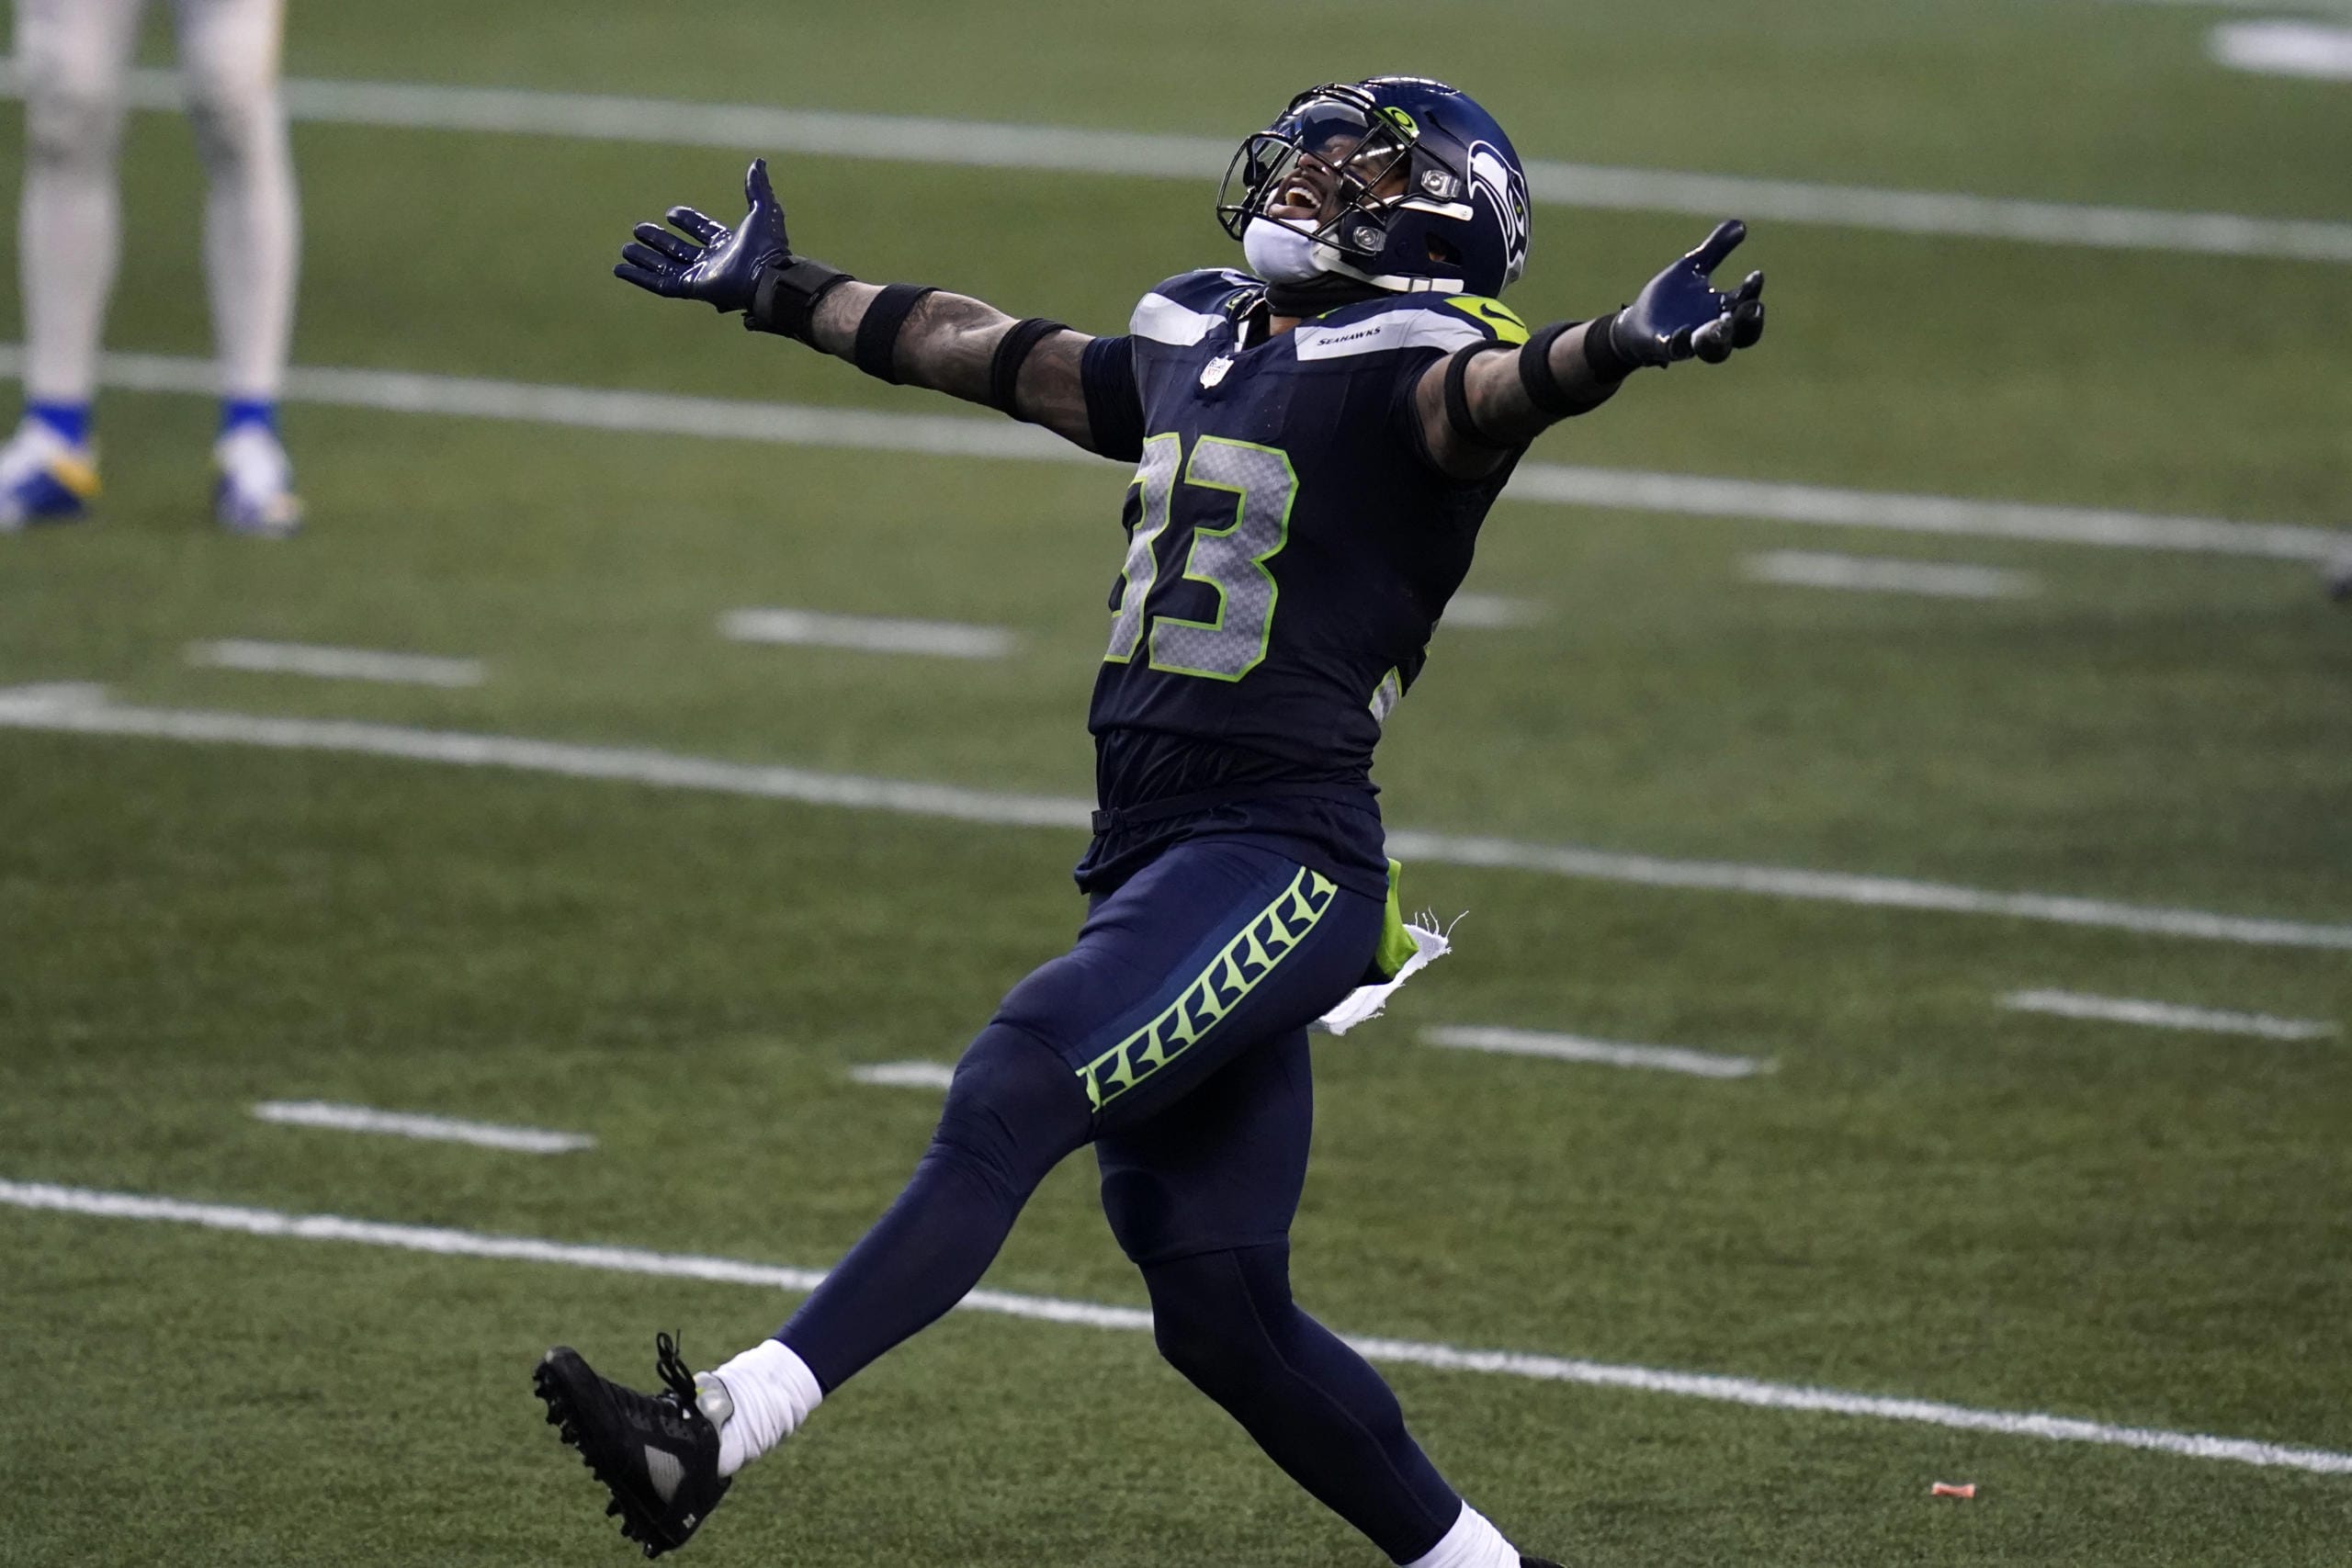 Seattle Seahawks strong safety Jamal Adams (33) reacts to a play against the Los Angeles Rams during the second half of an NFL football game, Sunday, Dec. 27, 2020, in Seattle. The Seahawks won 20-9.